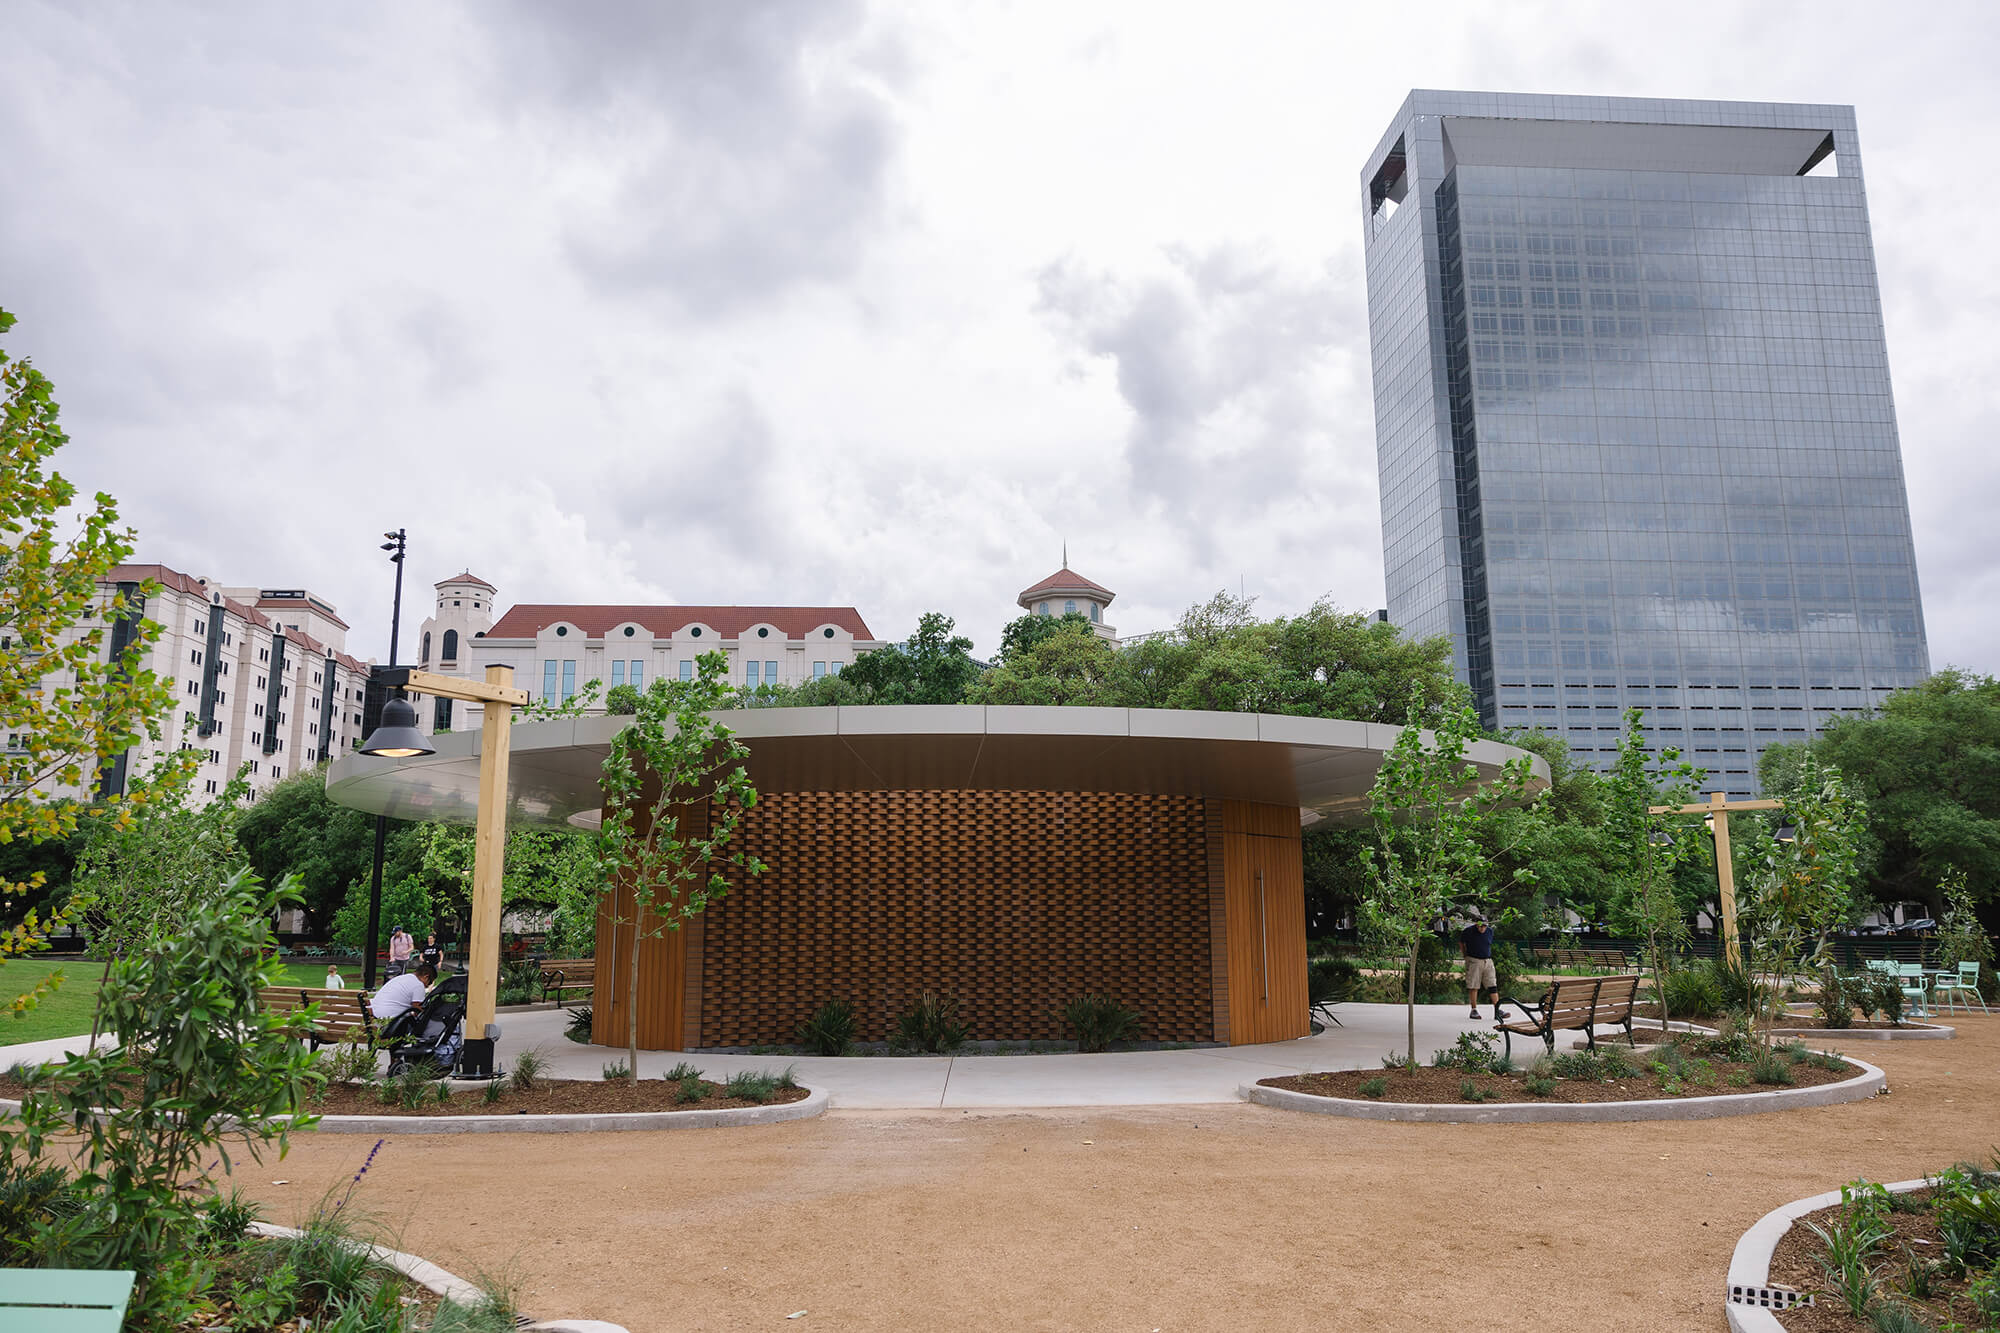 The Commons at Hermann Park by Michael Van Valkenburgh Associates and Marlon Blackwell Architects opens in Houston